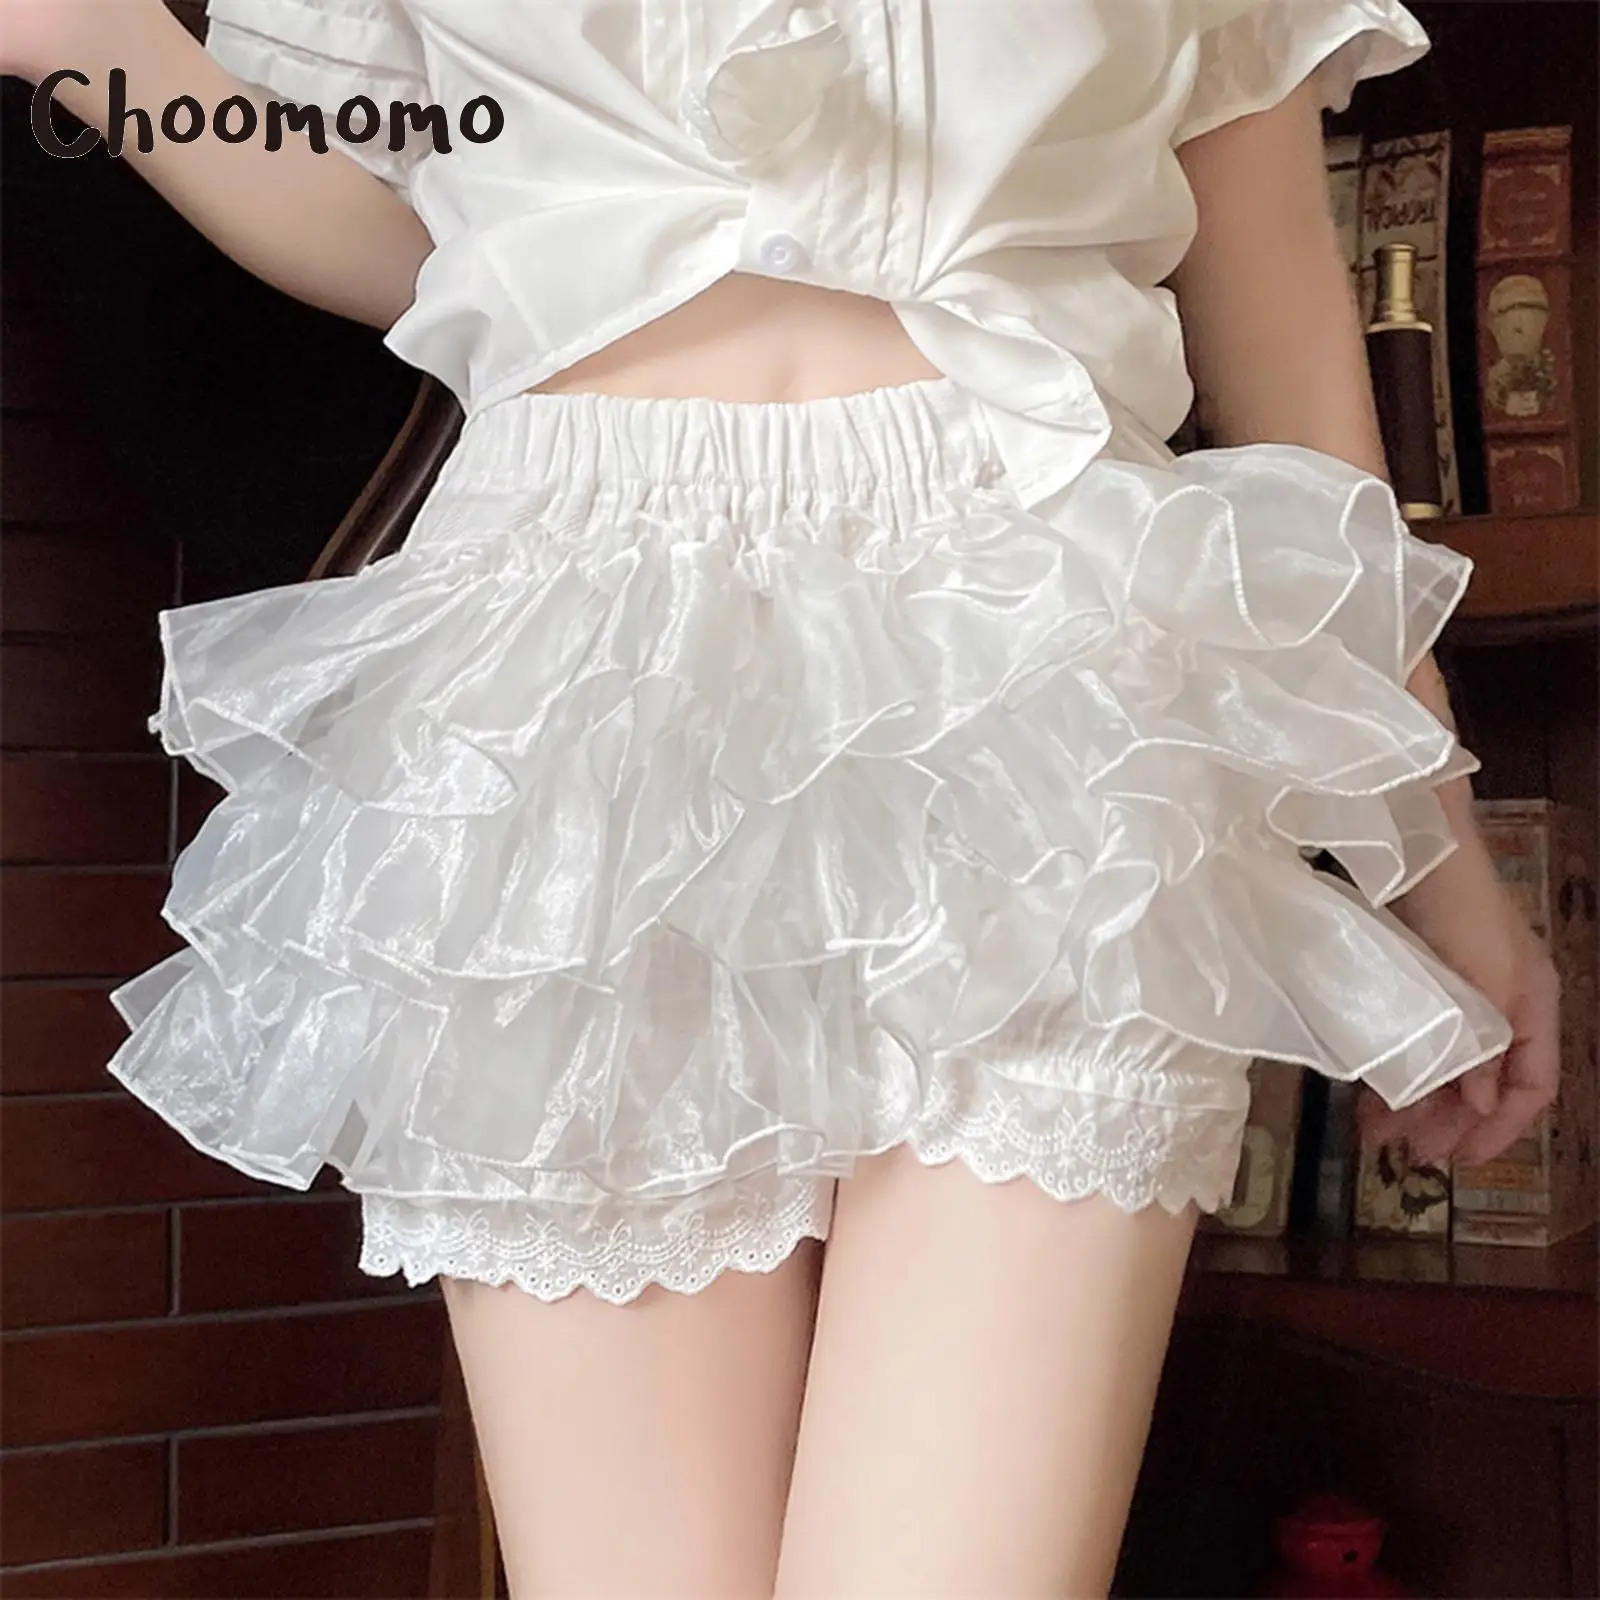 

Womens Maid Cosplay Halloween Theme Party Frilly Panties Tiered Ruffled Bloomers Shorts Lace Trim Culottes